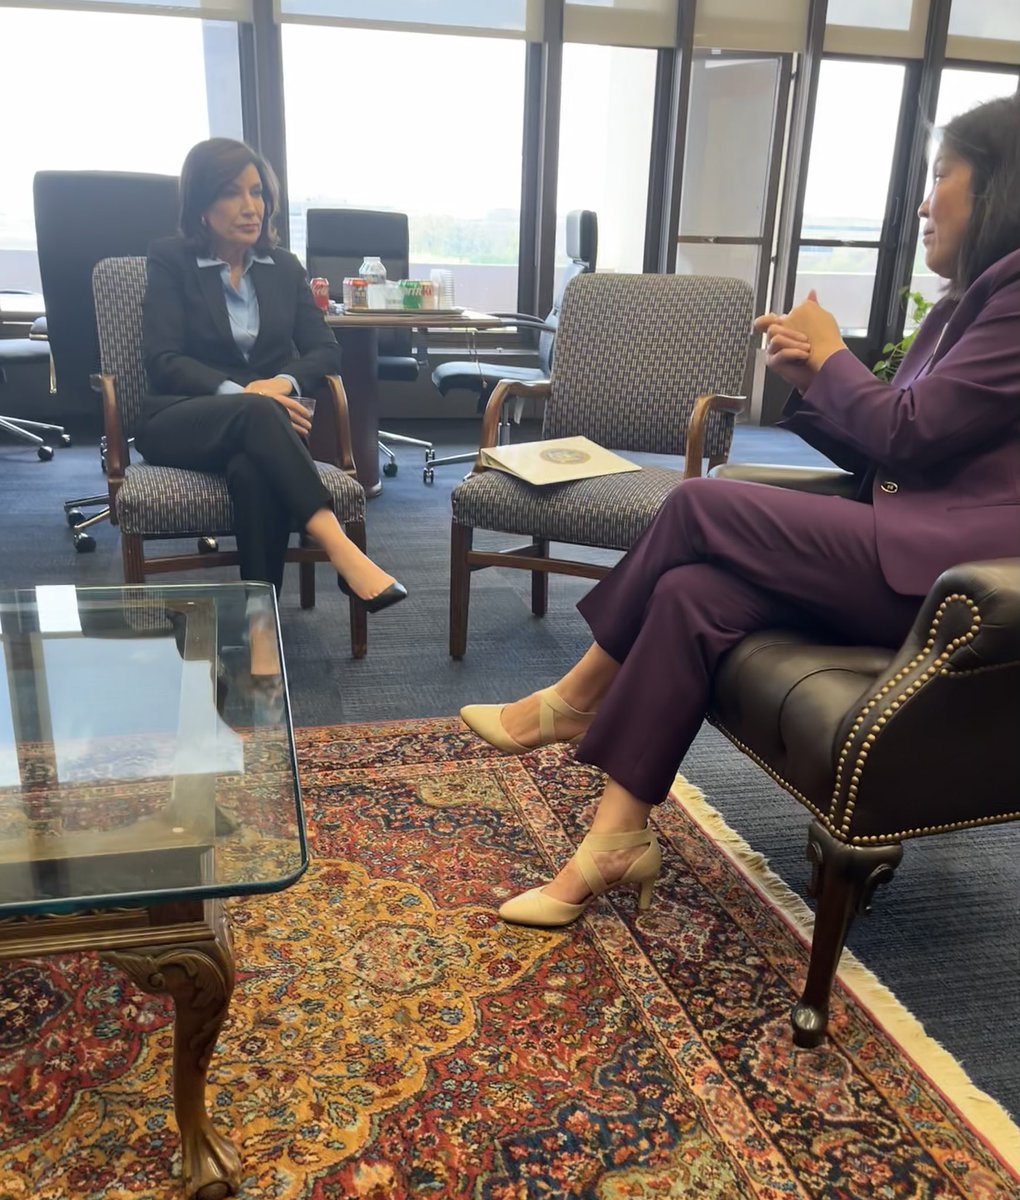 Productive meeting with @ActSecJulieSu in Washington, D.C. on ways to make unemployment insurance stronger for workers and businesses in New York, as well as ways to put asylum seekers and migrants to work.